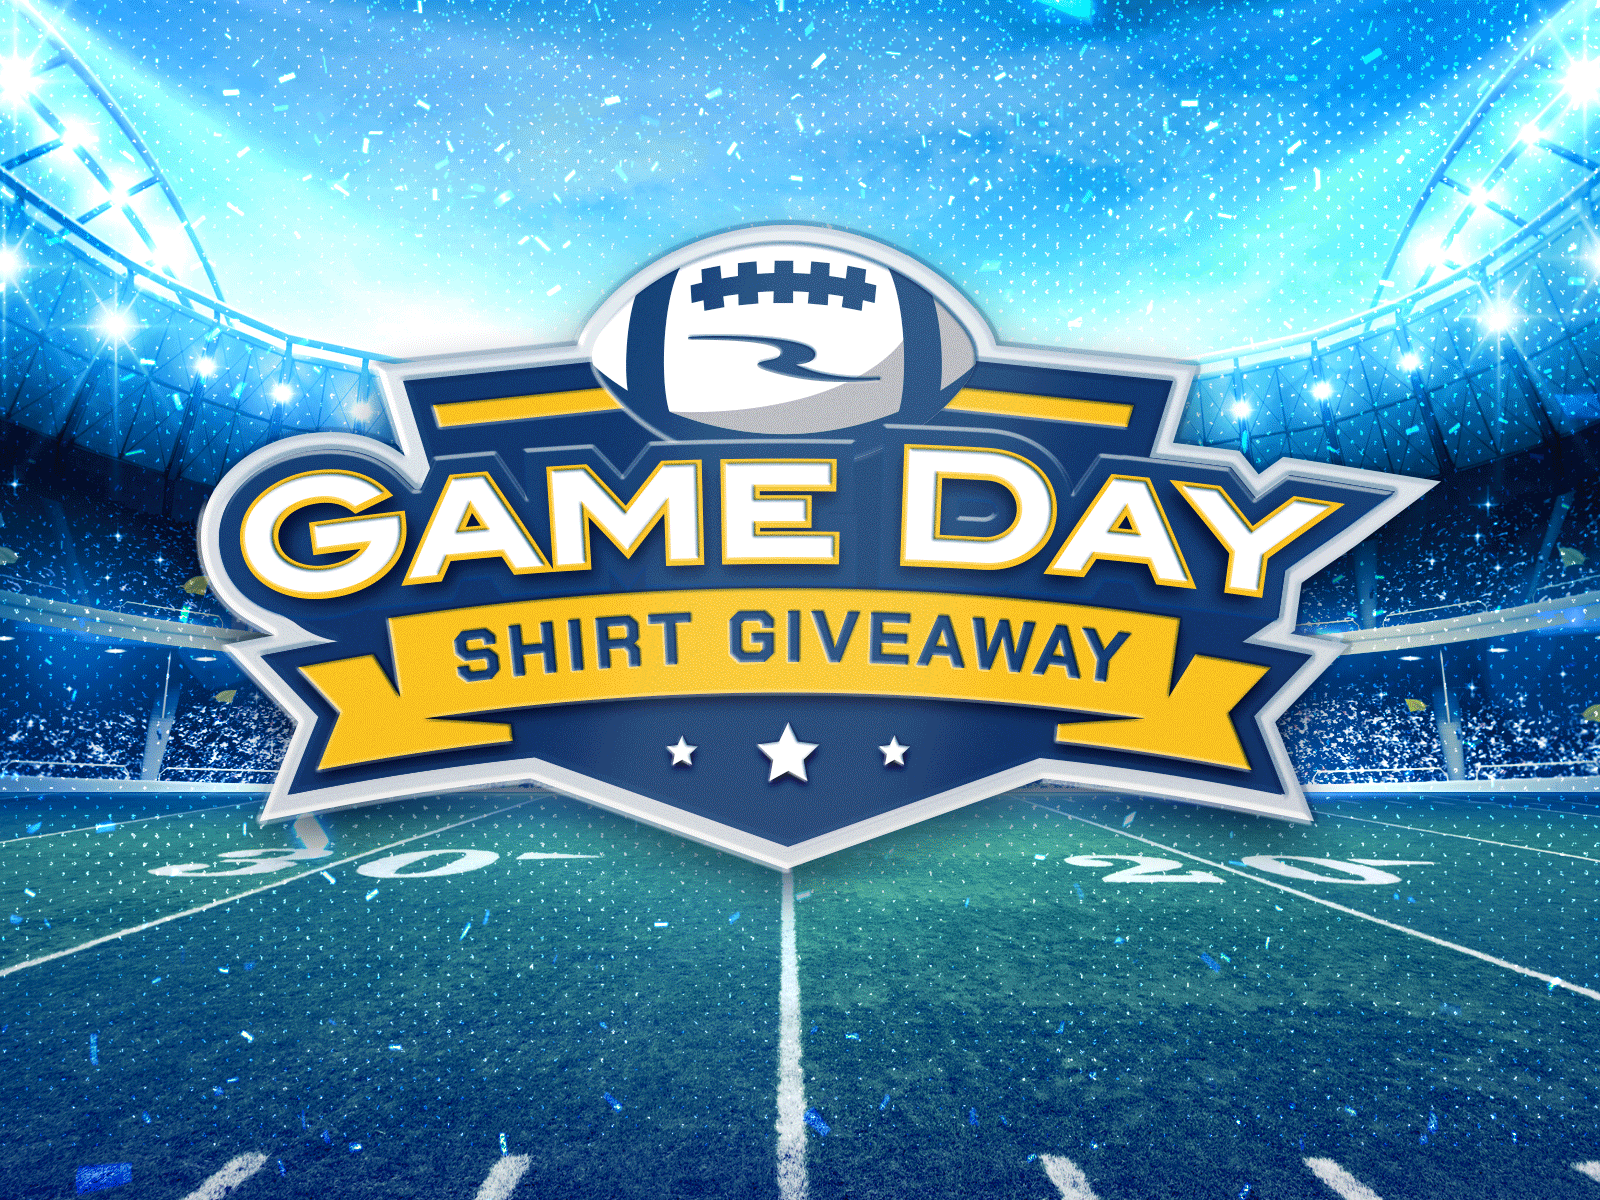 Rivers Game Day Shirt Giveaway Promo